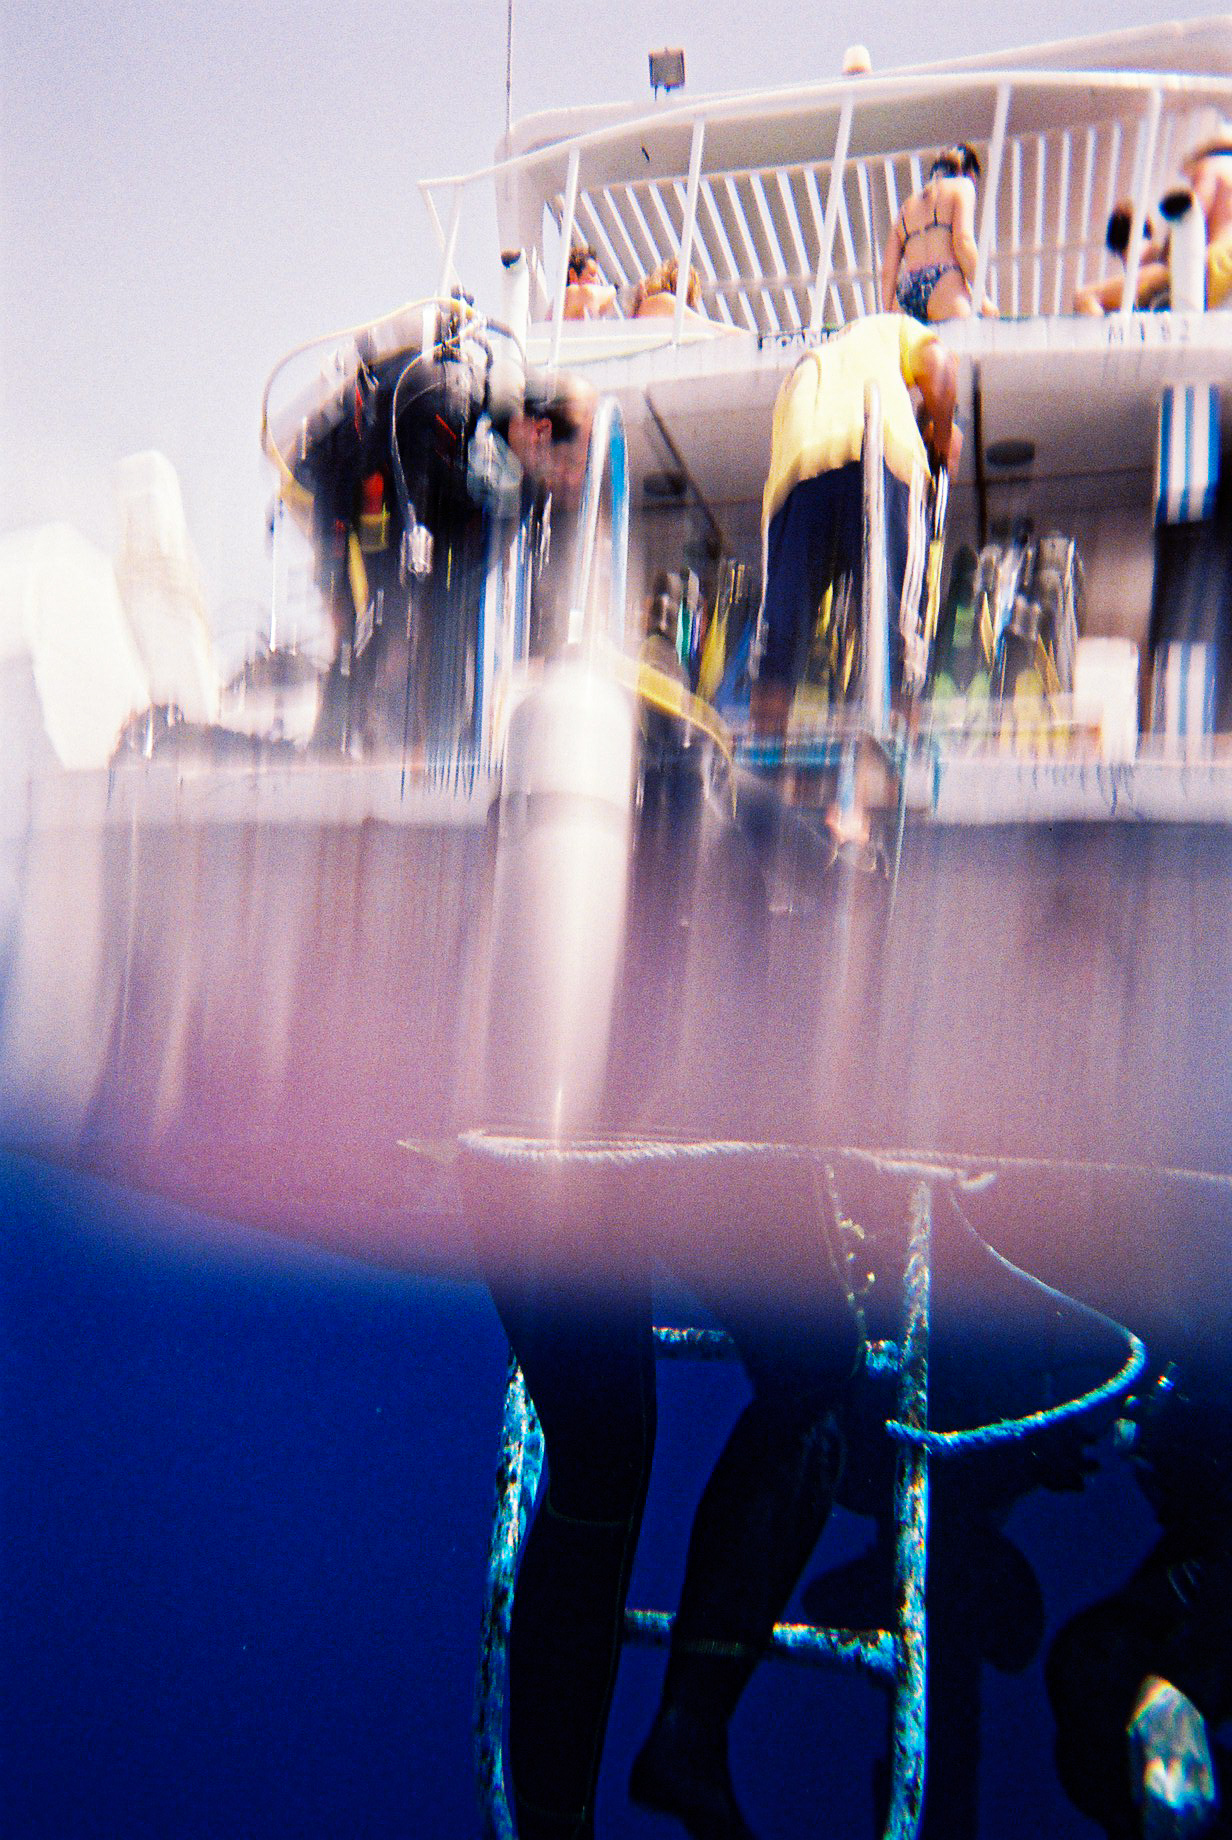 Photo taken at the limit between air and water, in the sea, with a boat, and a diver on a ladder